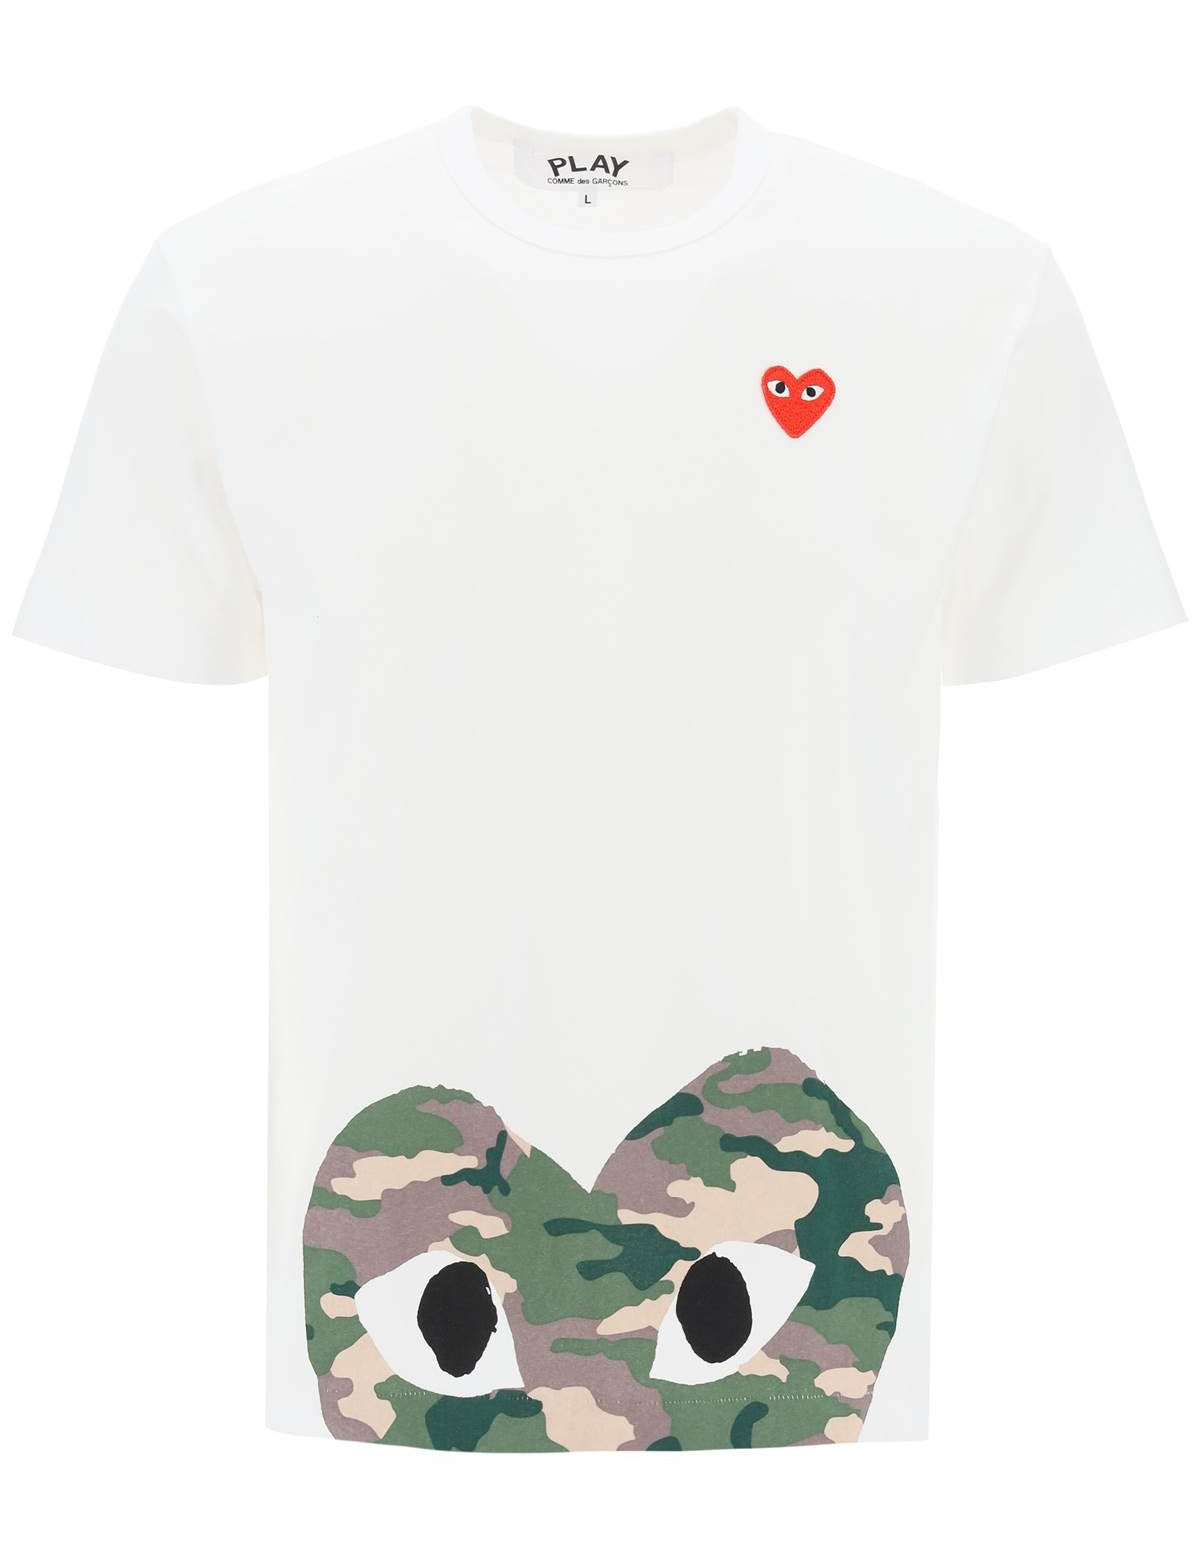 comme-des-garcons-play-camouflage-heart-t-shirt.jpg